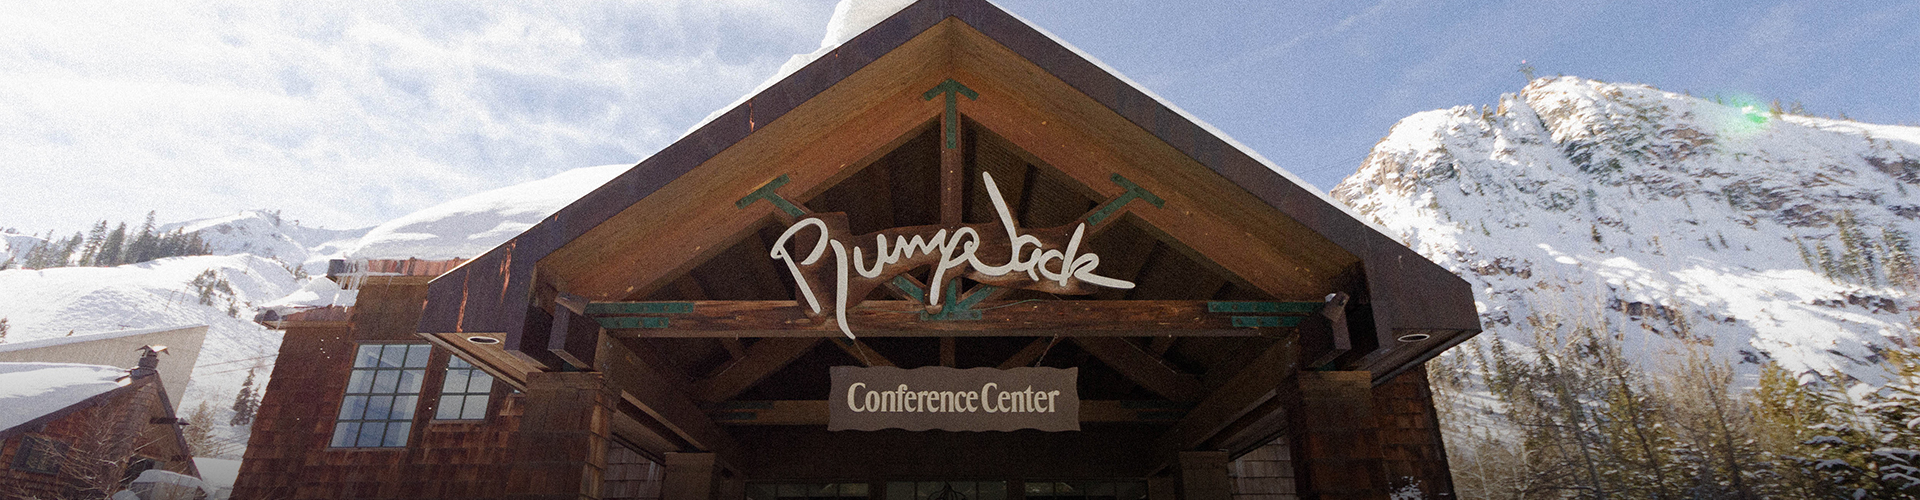 a shoot of the logo on top of the entrance for the conference center at plumpjack inn